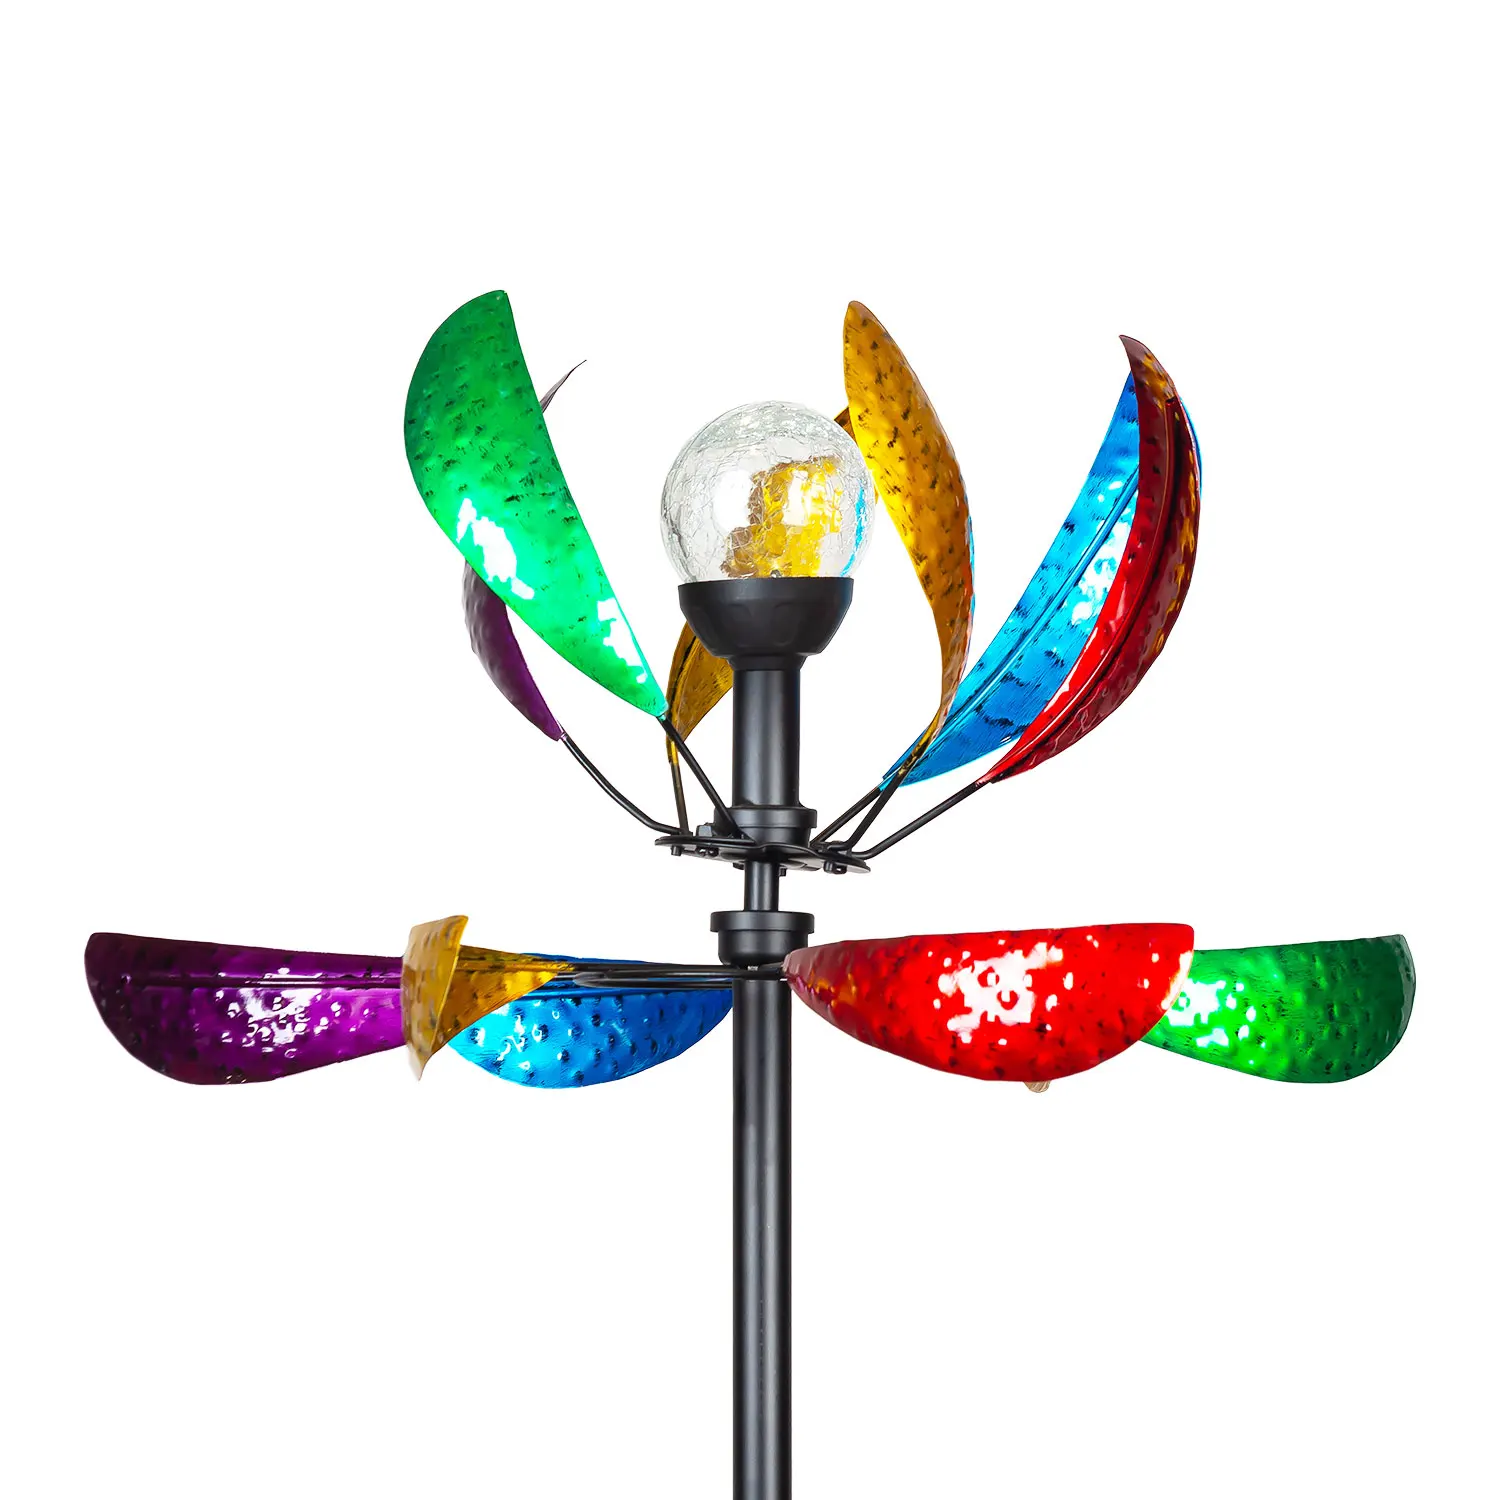 Colorful Solar LED Lighting Windmill Garden Ornament Wind Spinner with Solar Powered Glass Ball